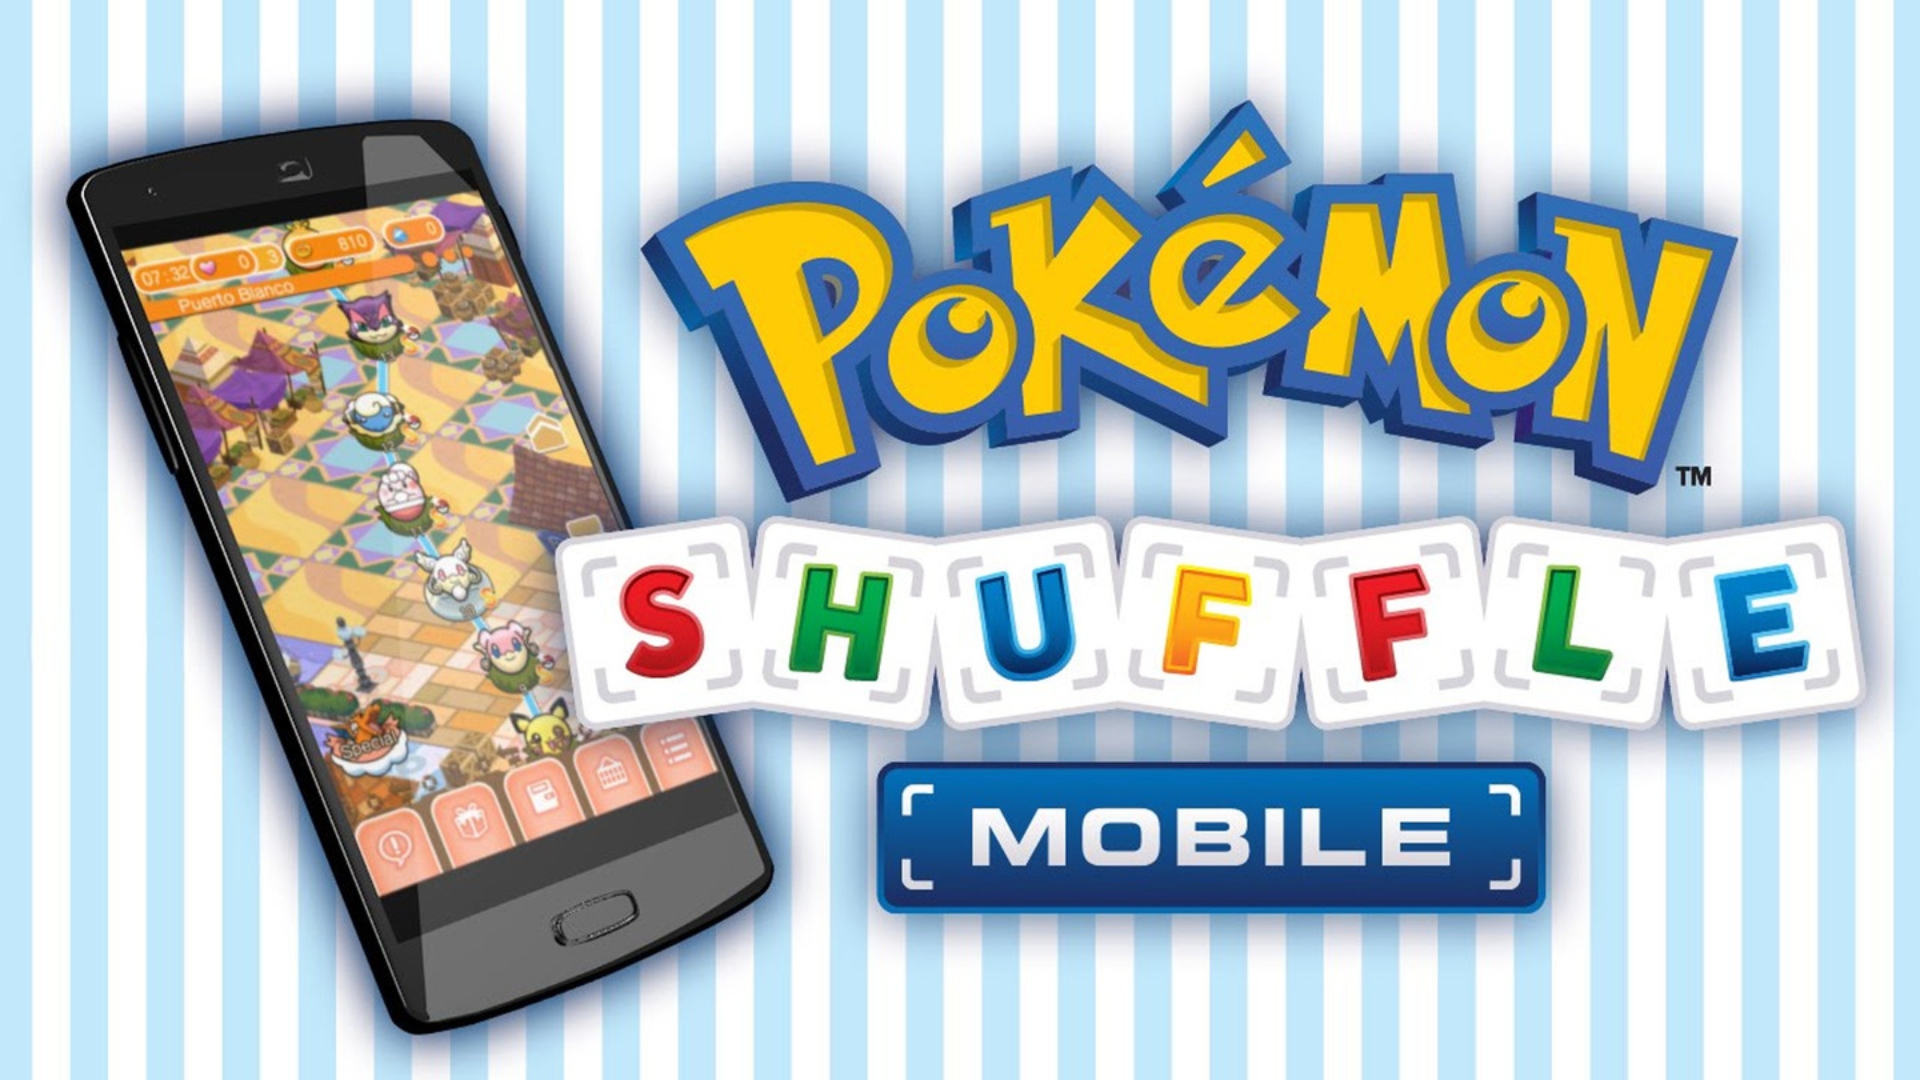 Addictive games - Pokémon Shuffle Mobile. Image shows the logo and official artwork of the game on a phone screen.